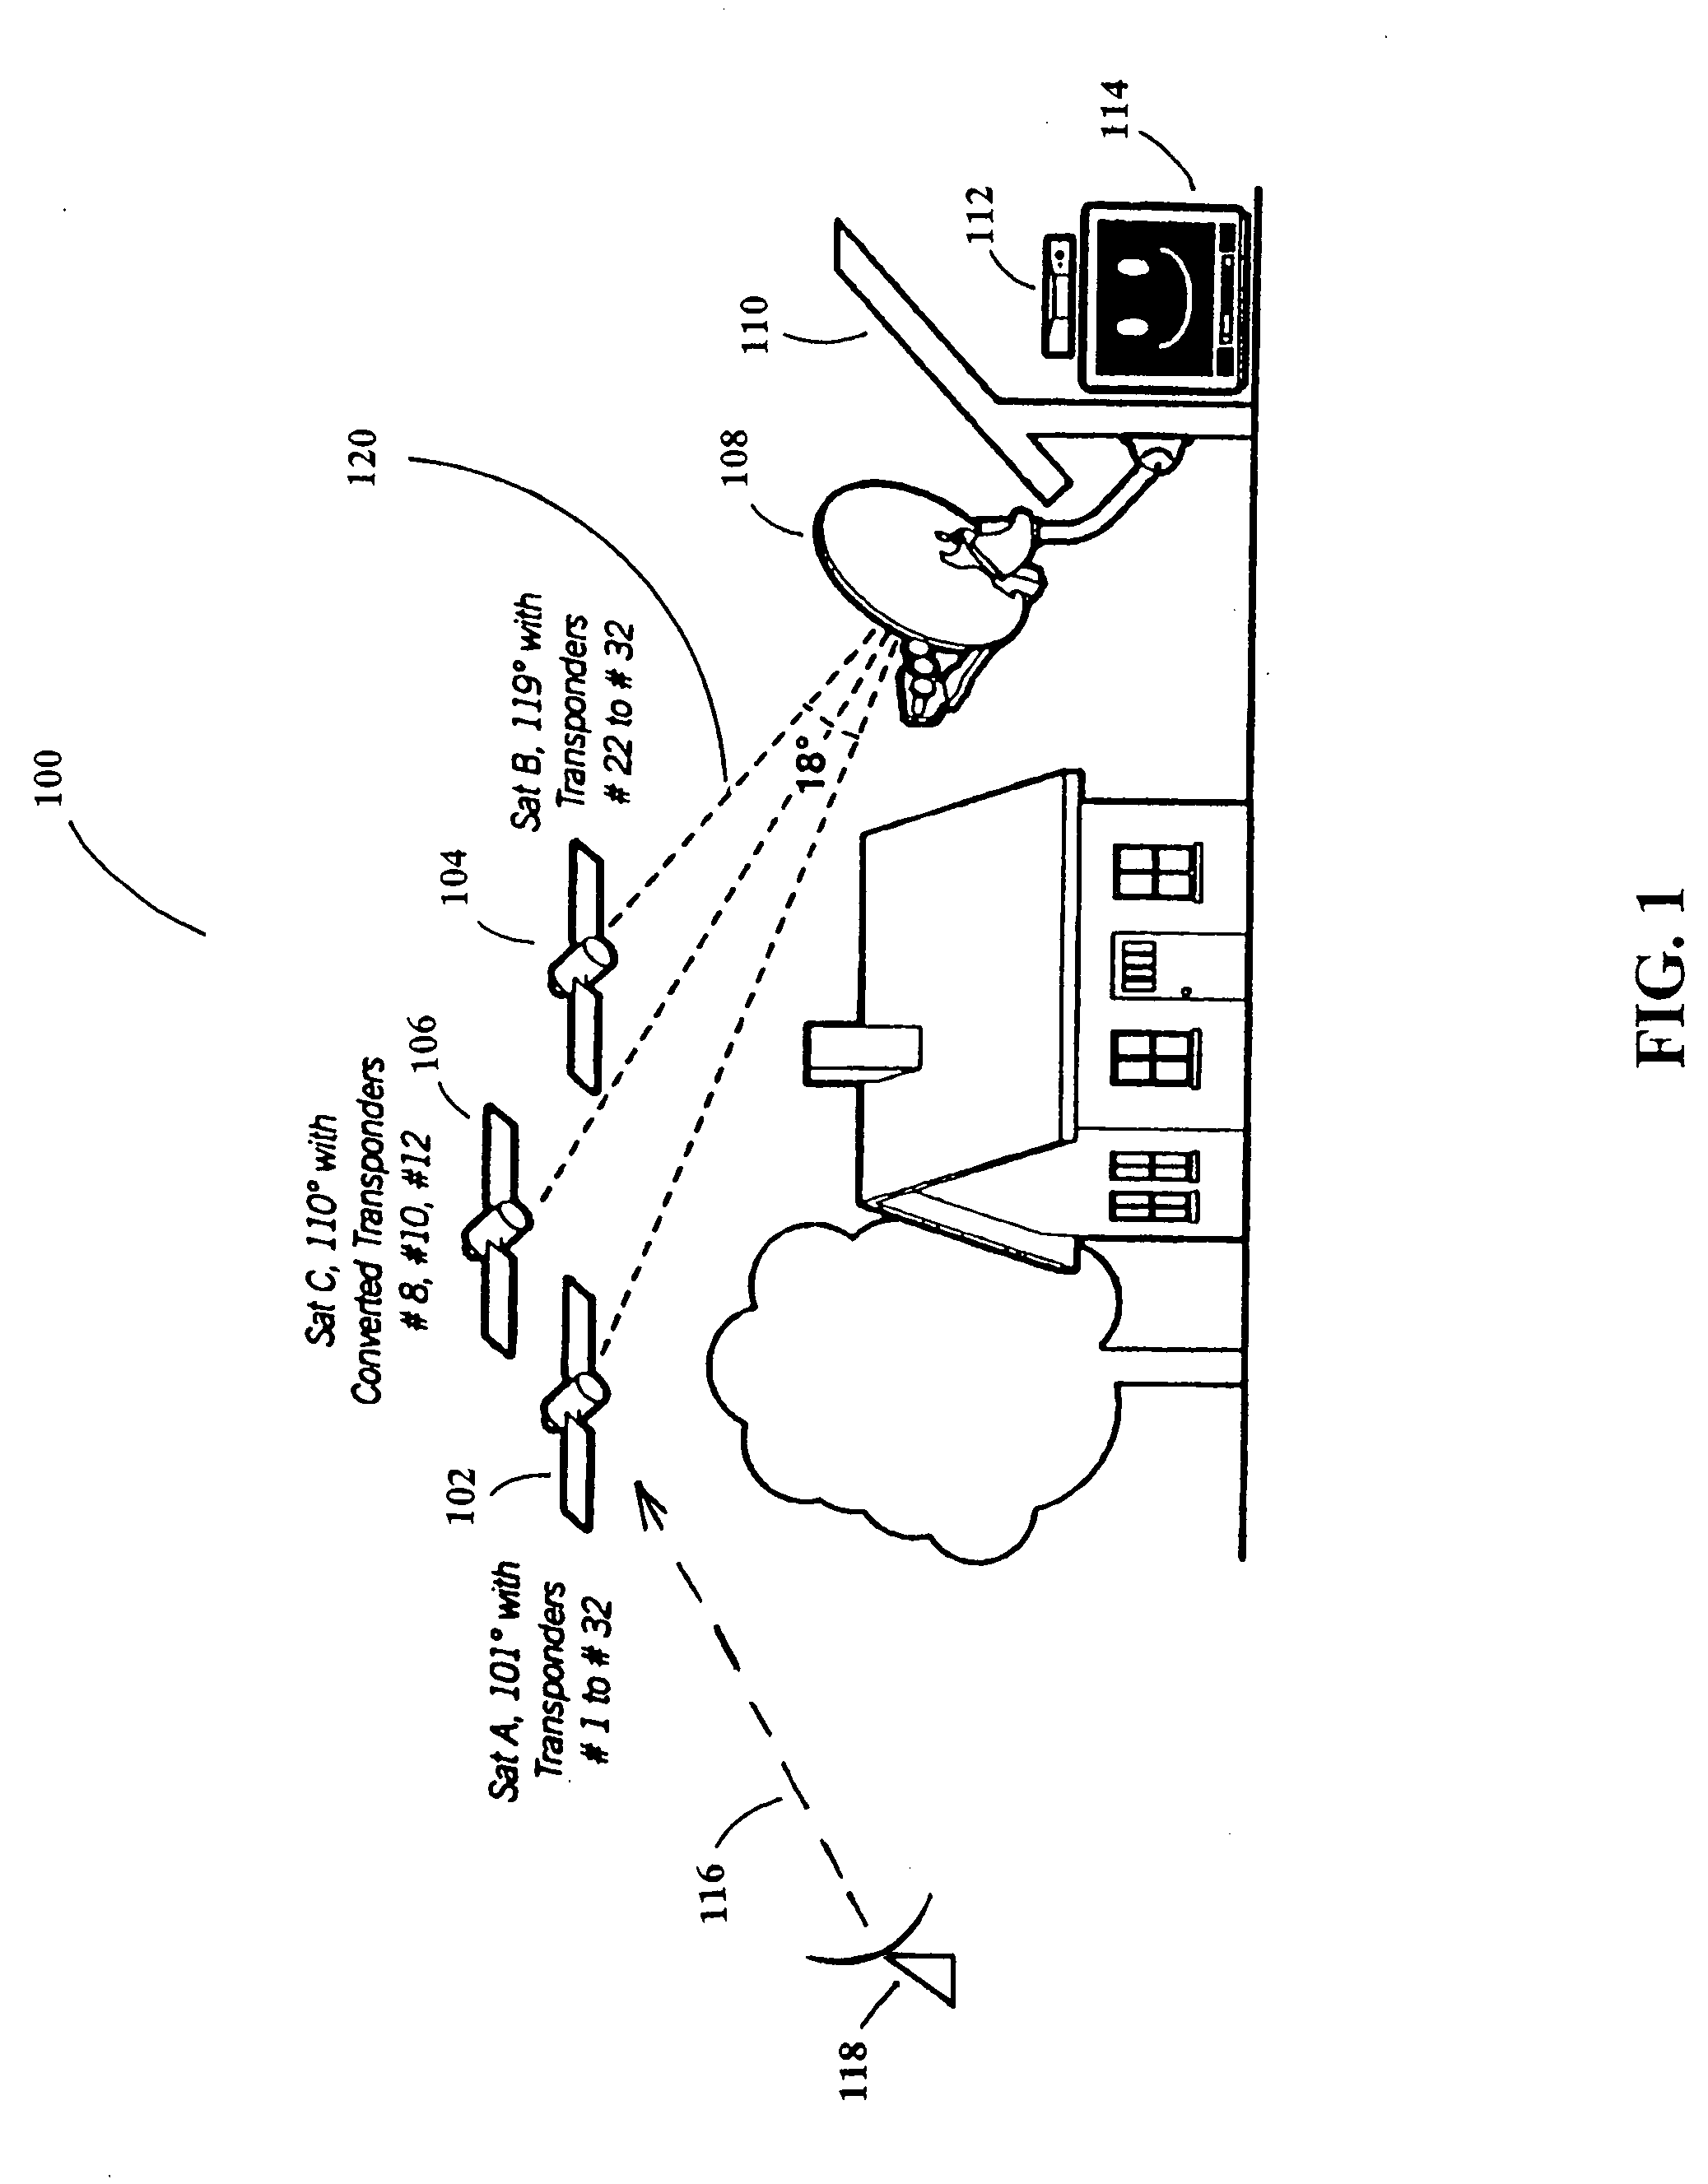 System architecture for control and signal distribution on coaxial cable